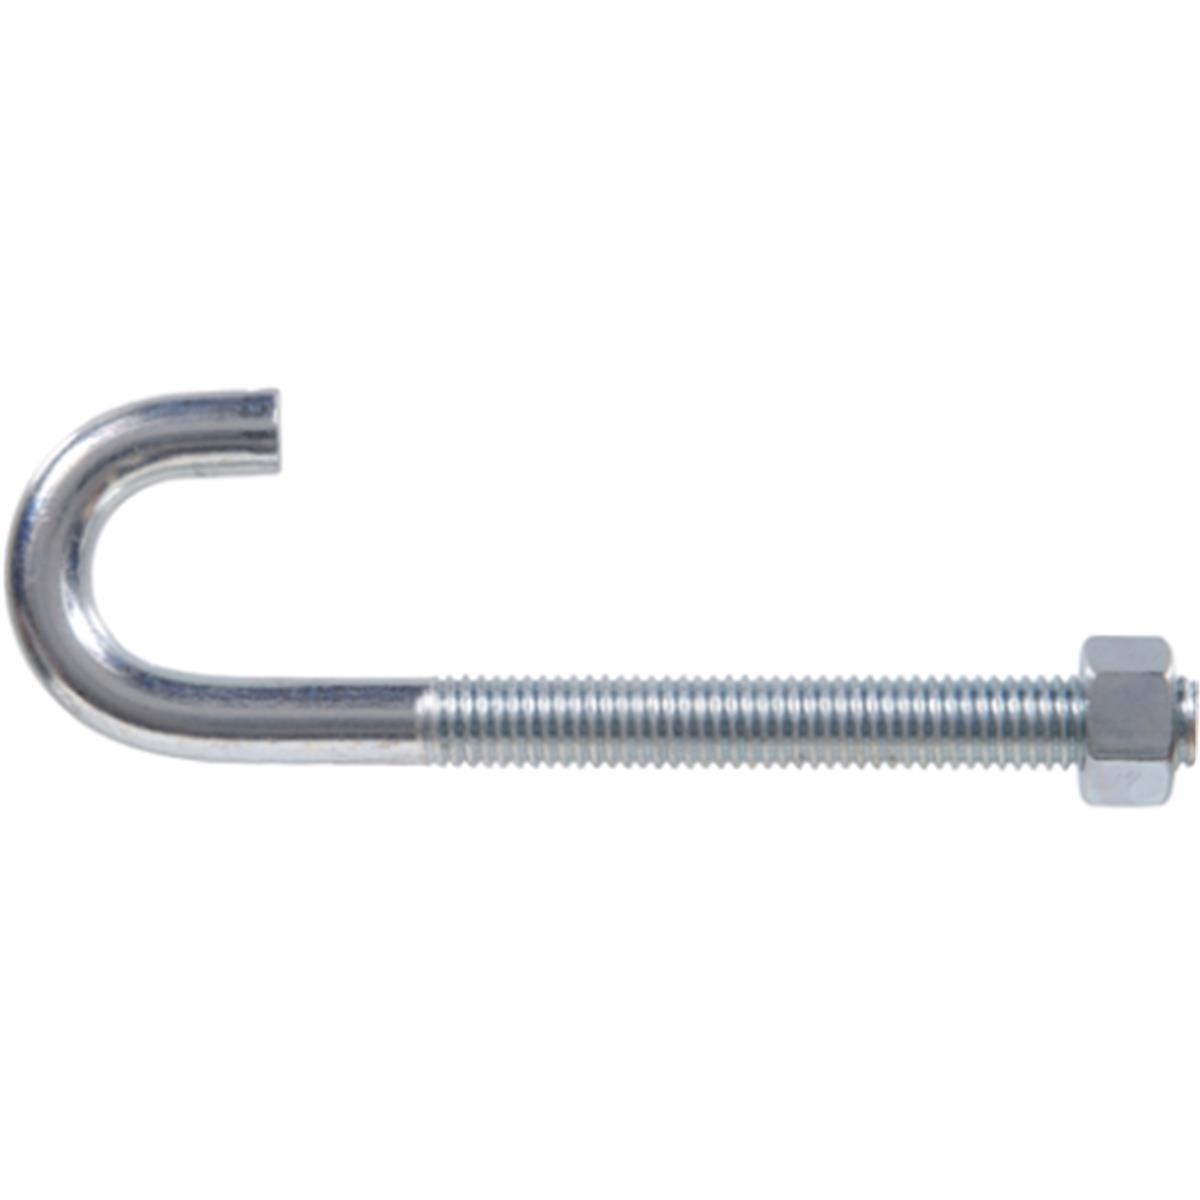 0.37-16 X 3.75 In. Zinc Plated J-bolt With Nut, Pack Of 10